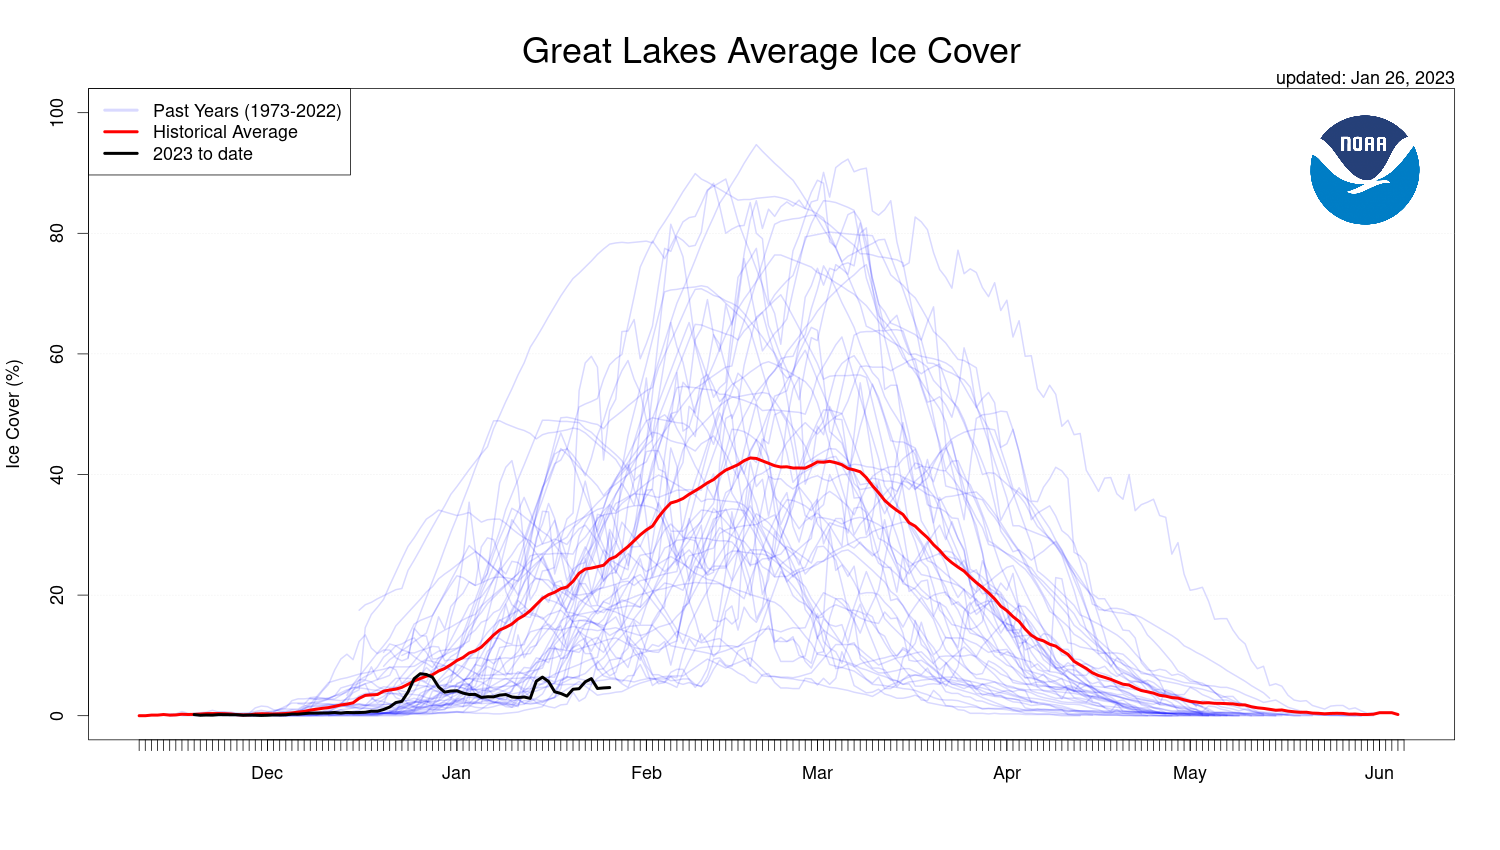 GLERL historical ice cover